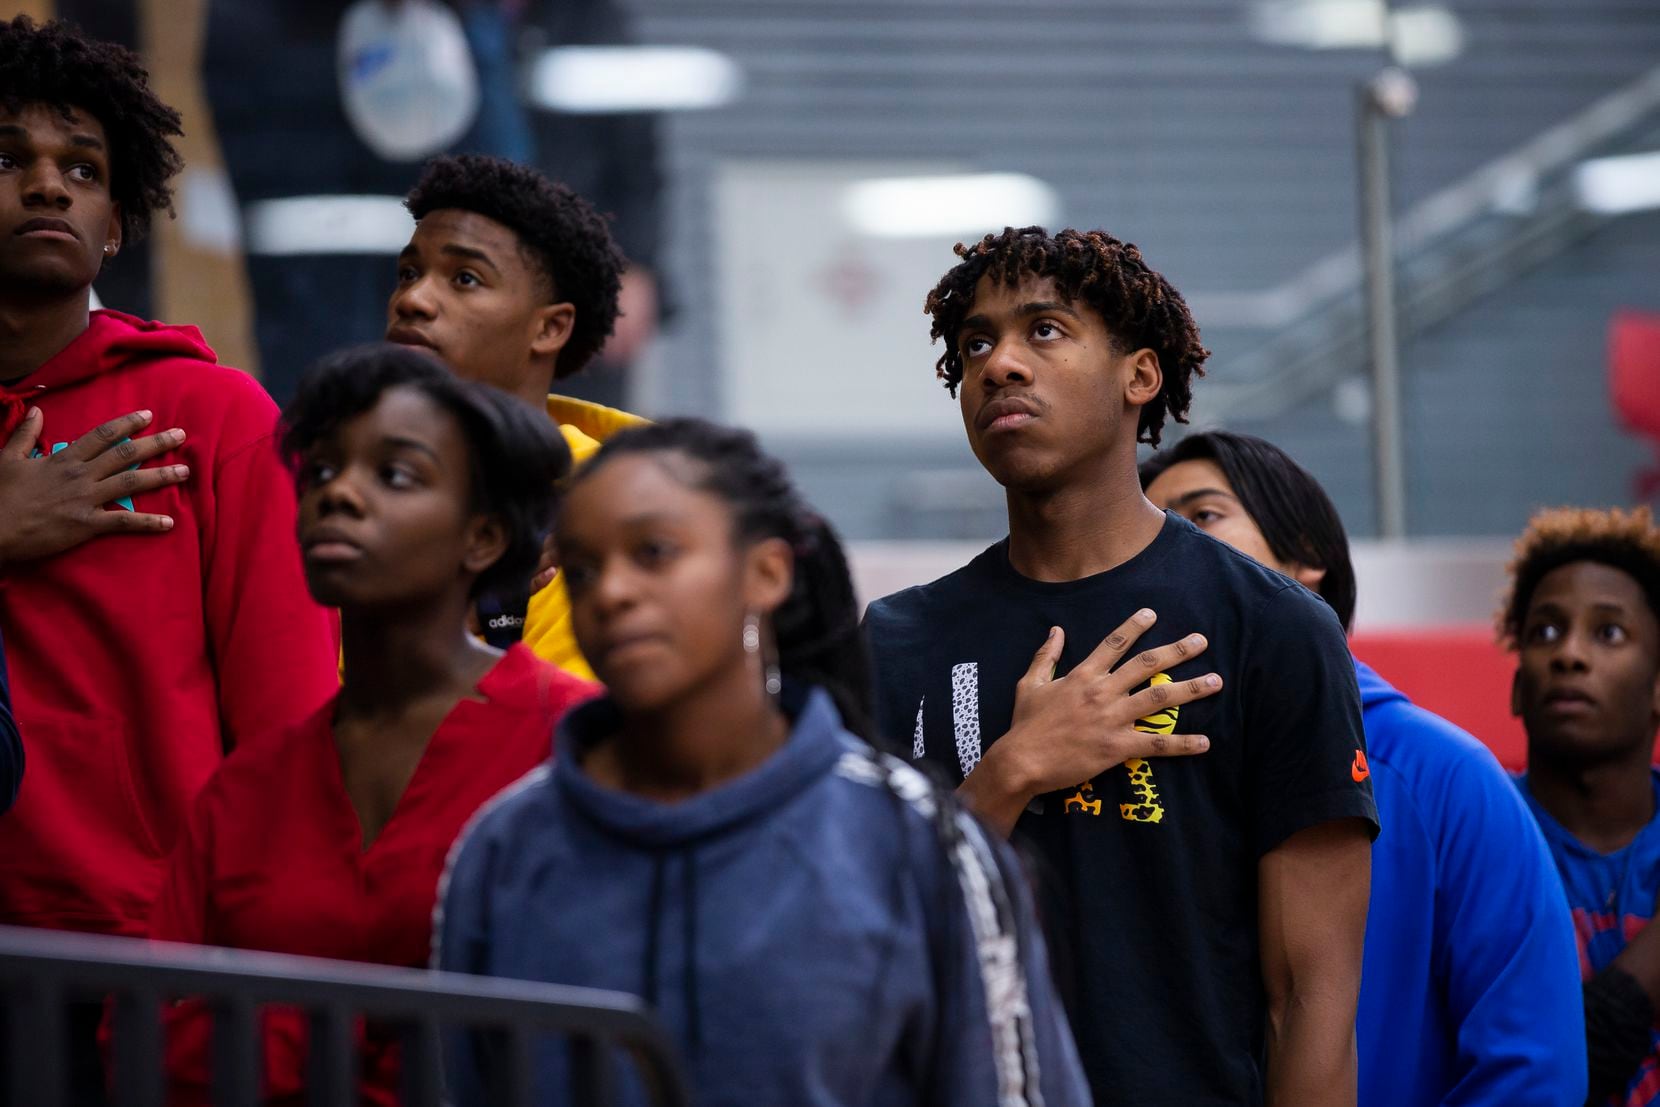 Allen High School junior Devon Chatman, 16, pauses for a moment of silence remembering Marquel Ellis Jr., 16, before a varsity basketball game on Nov. 18, 2019 in Allen. Ellis, a sophomore, was fatally shot at a Plano home late Saturday, according to police and school officials. (Juan Figueroa/ The Dallas Morning News)